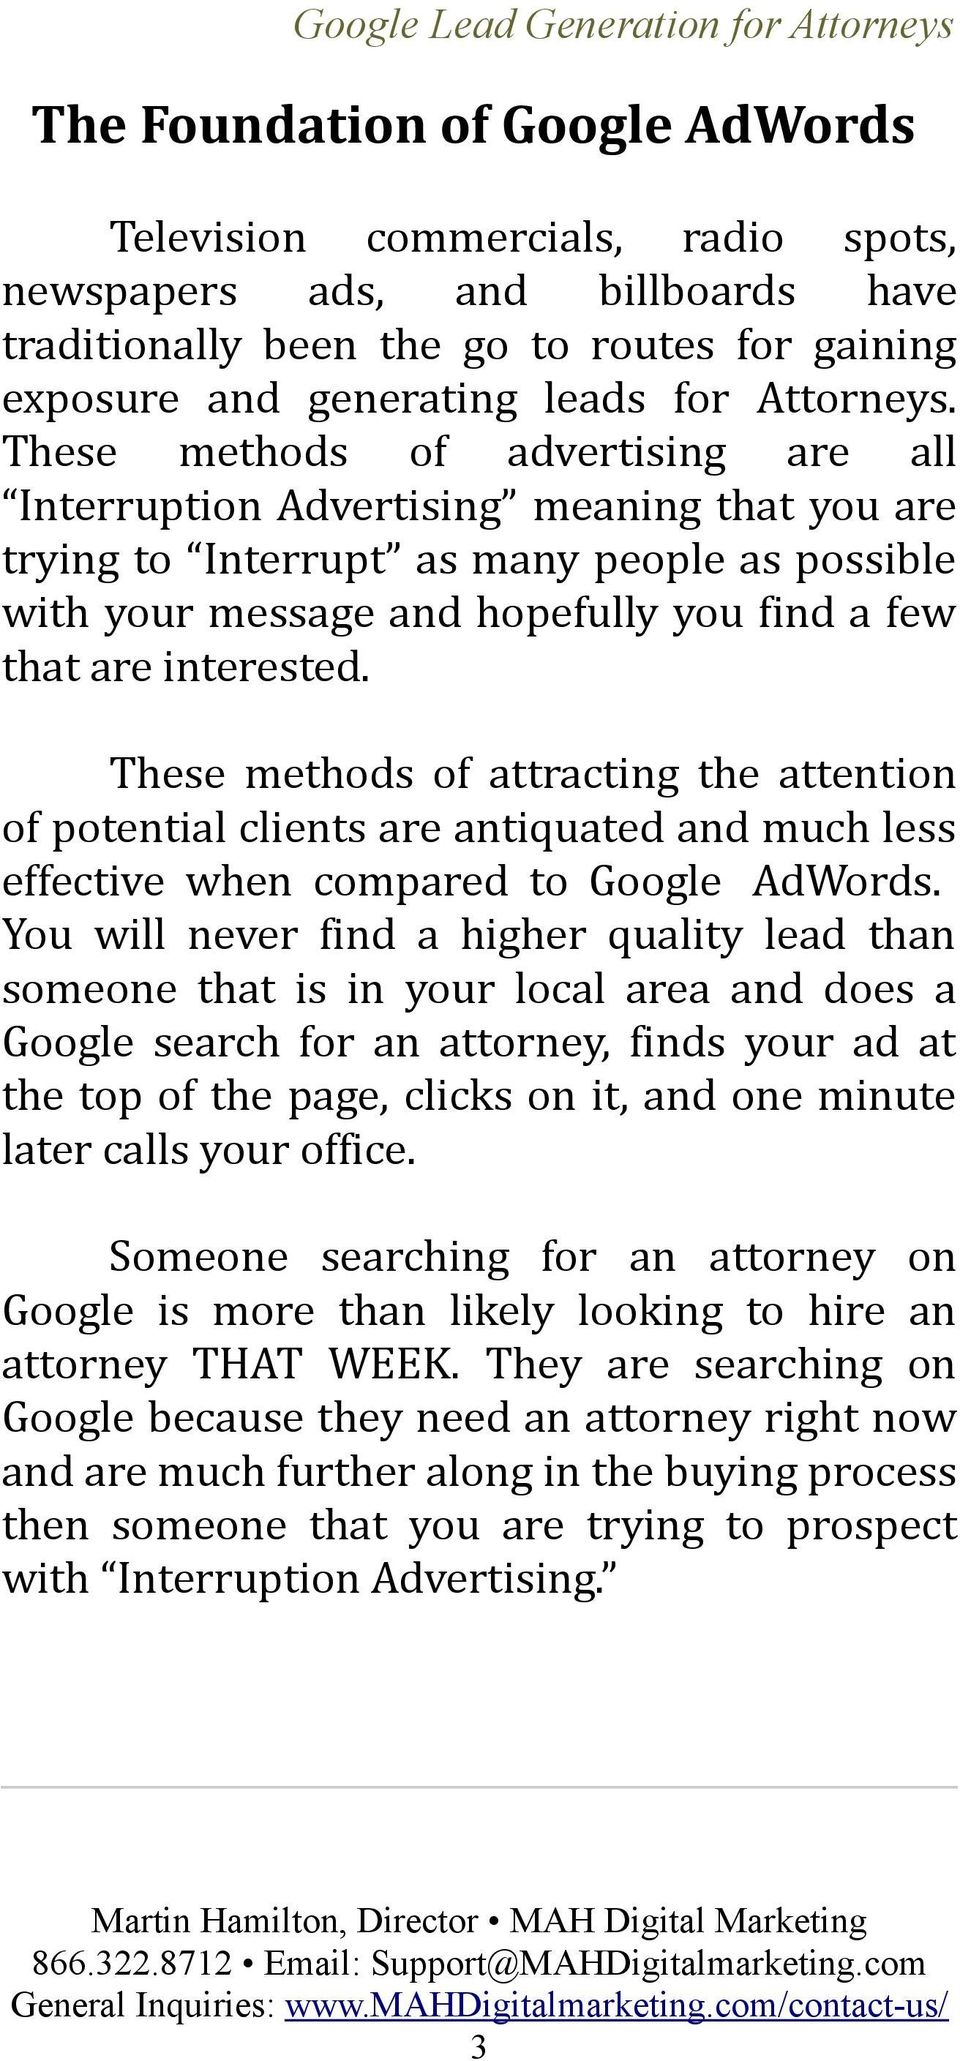 These methods of attracting the attention of potential clients are antiquated and much less effective when compared to Google AdWords.